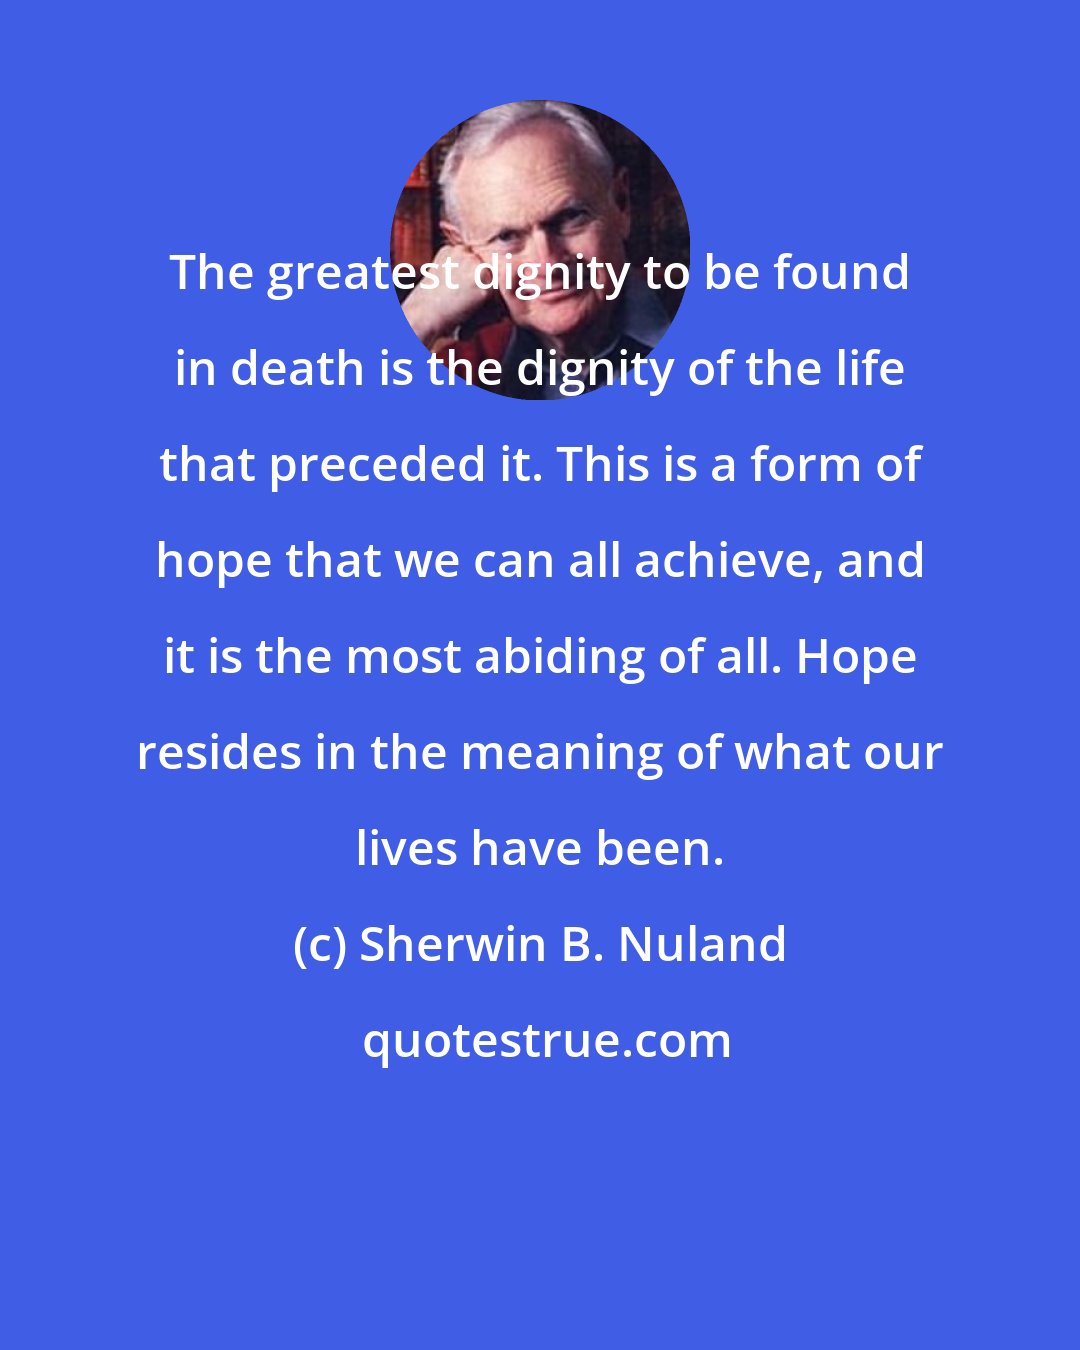 Sherwin B. Nuland: The greatest dignity to be found in death is the dignity of the life that preceded it. This is a form of hope that we can all achieve, and it is the most abiding of all. Hope resides in the meaning of what our lives have been.